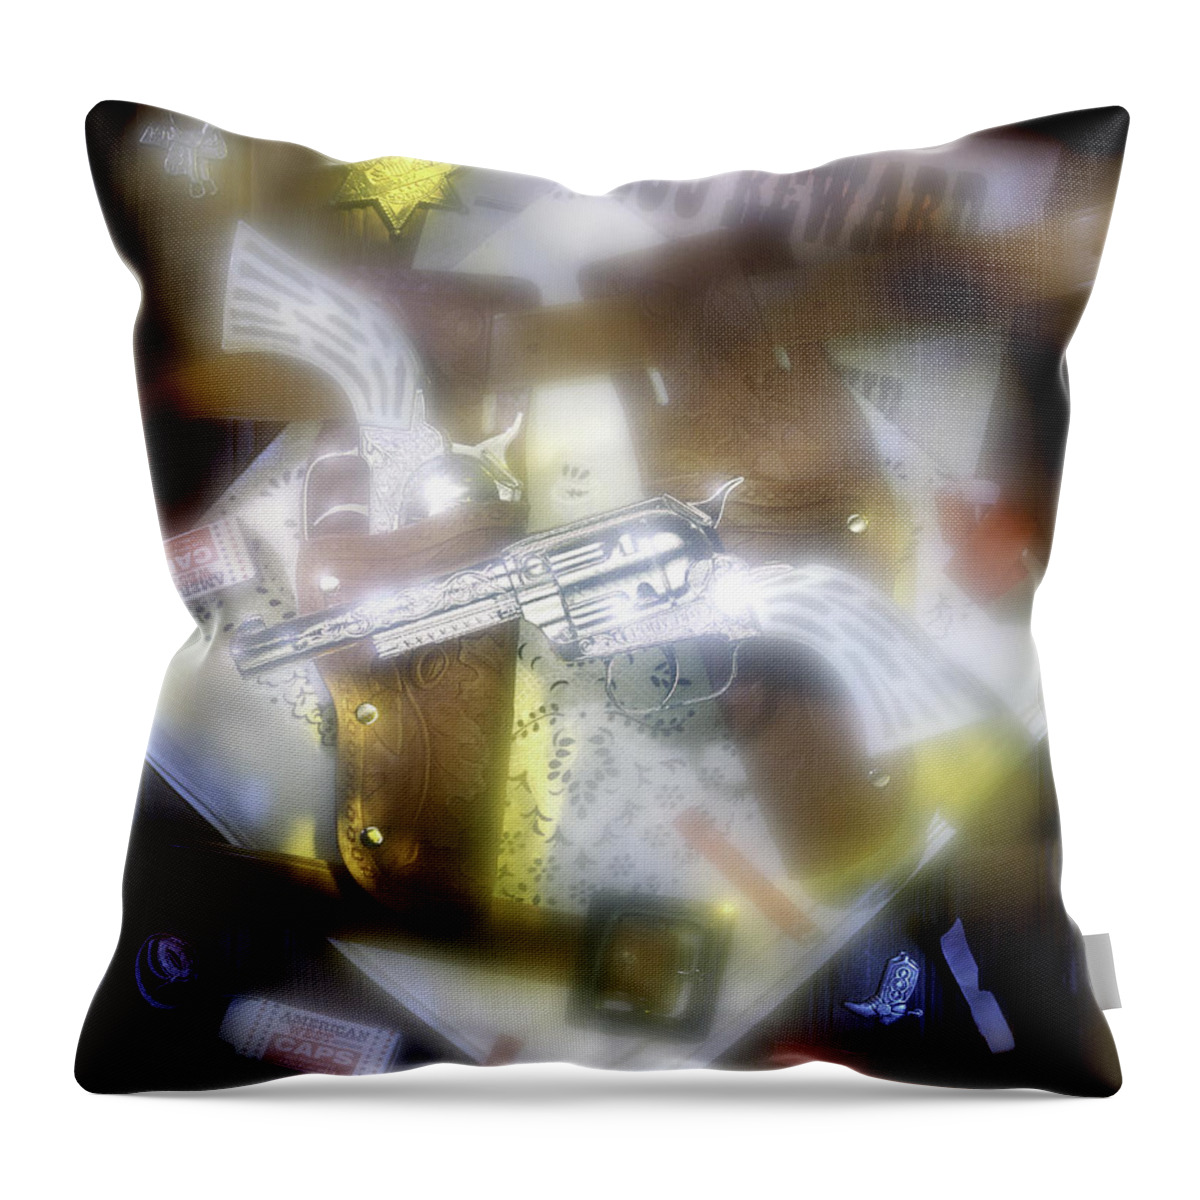 Western Myth Throw Pillow featuring the photograph Pony Boy Tigers by Craig J Satterlee